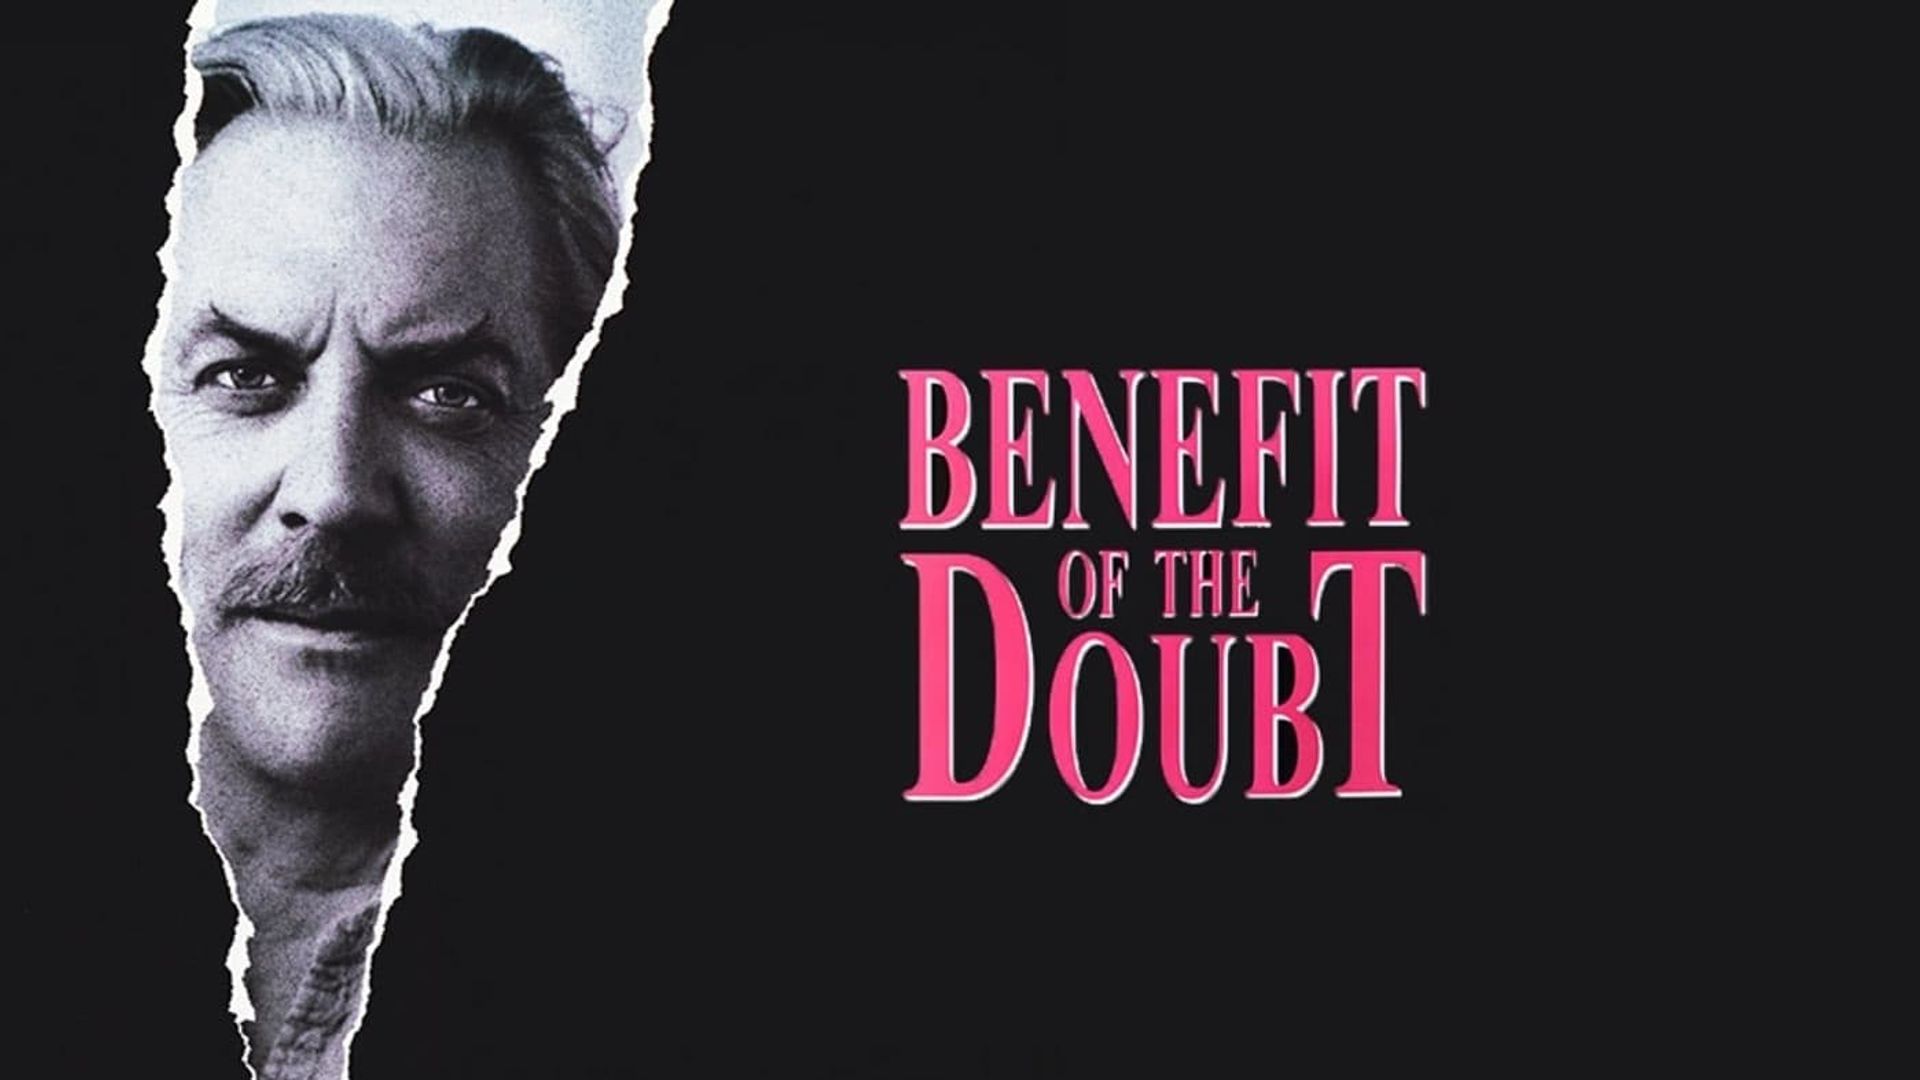 Benefit of the Doubt background